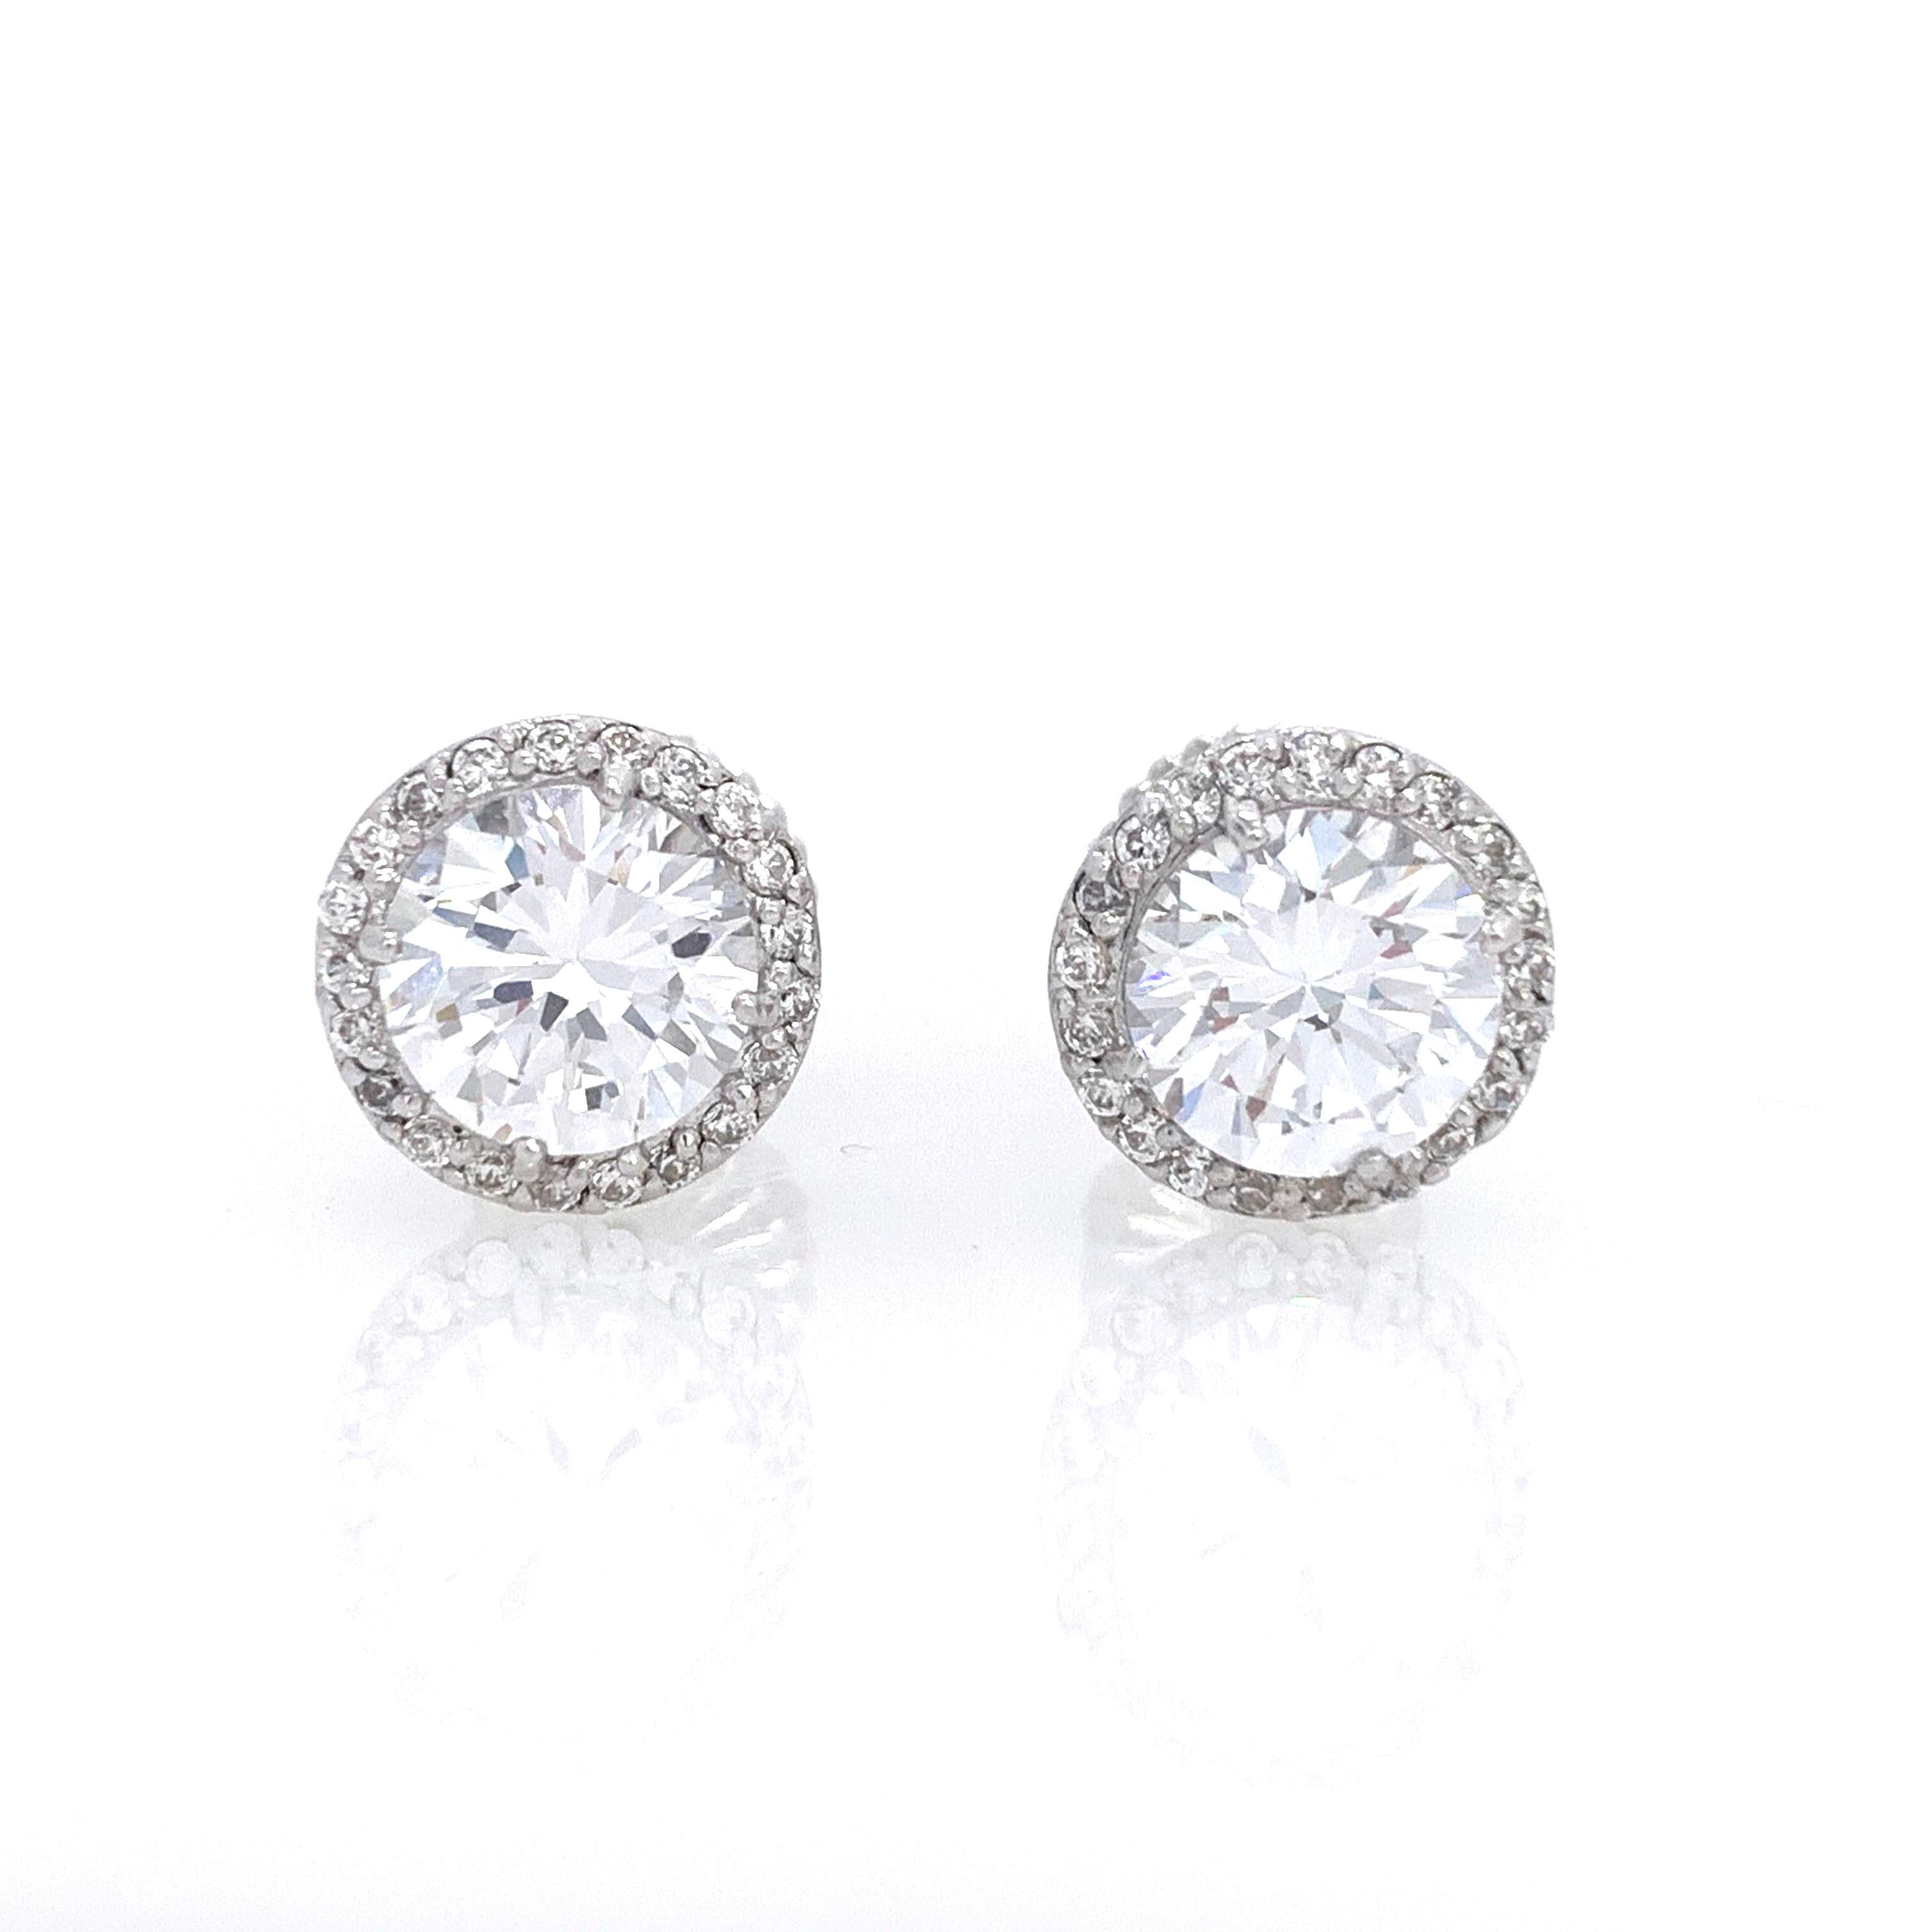 Stunning 4ct Simulated Diamond Halo Stud Sterling Silver Earrings

The earrings feature 2 top quality brilliant-cut round simulated diamonds (2ct each) - 4carat total weight, surrounded with round stones, handset in platinum rhodium plated sterling